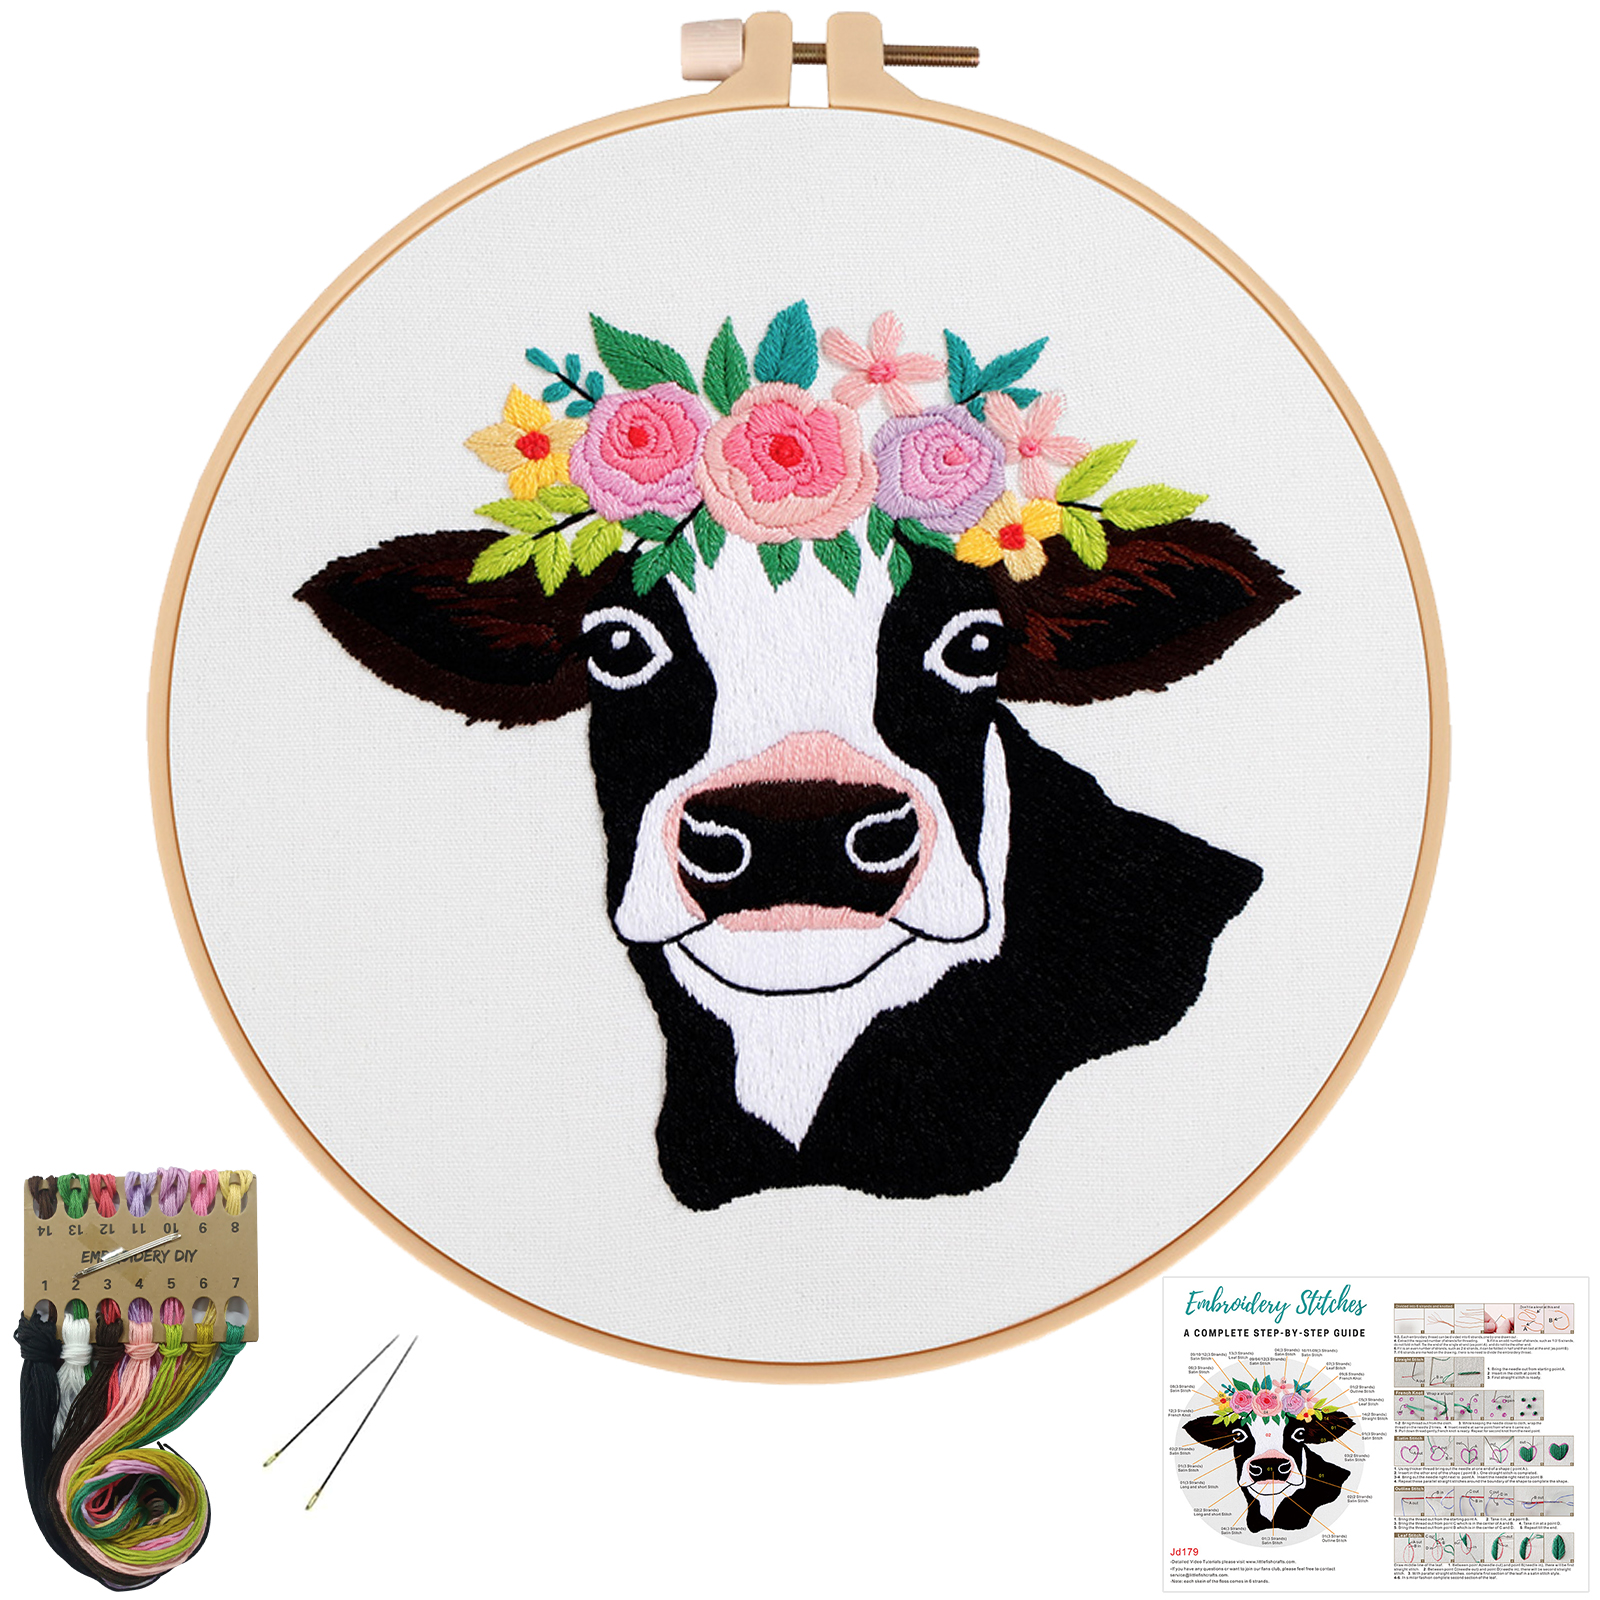 Embroidery Starter Kit Cross stitch kit for Adult Beginner - Cow pattern